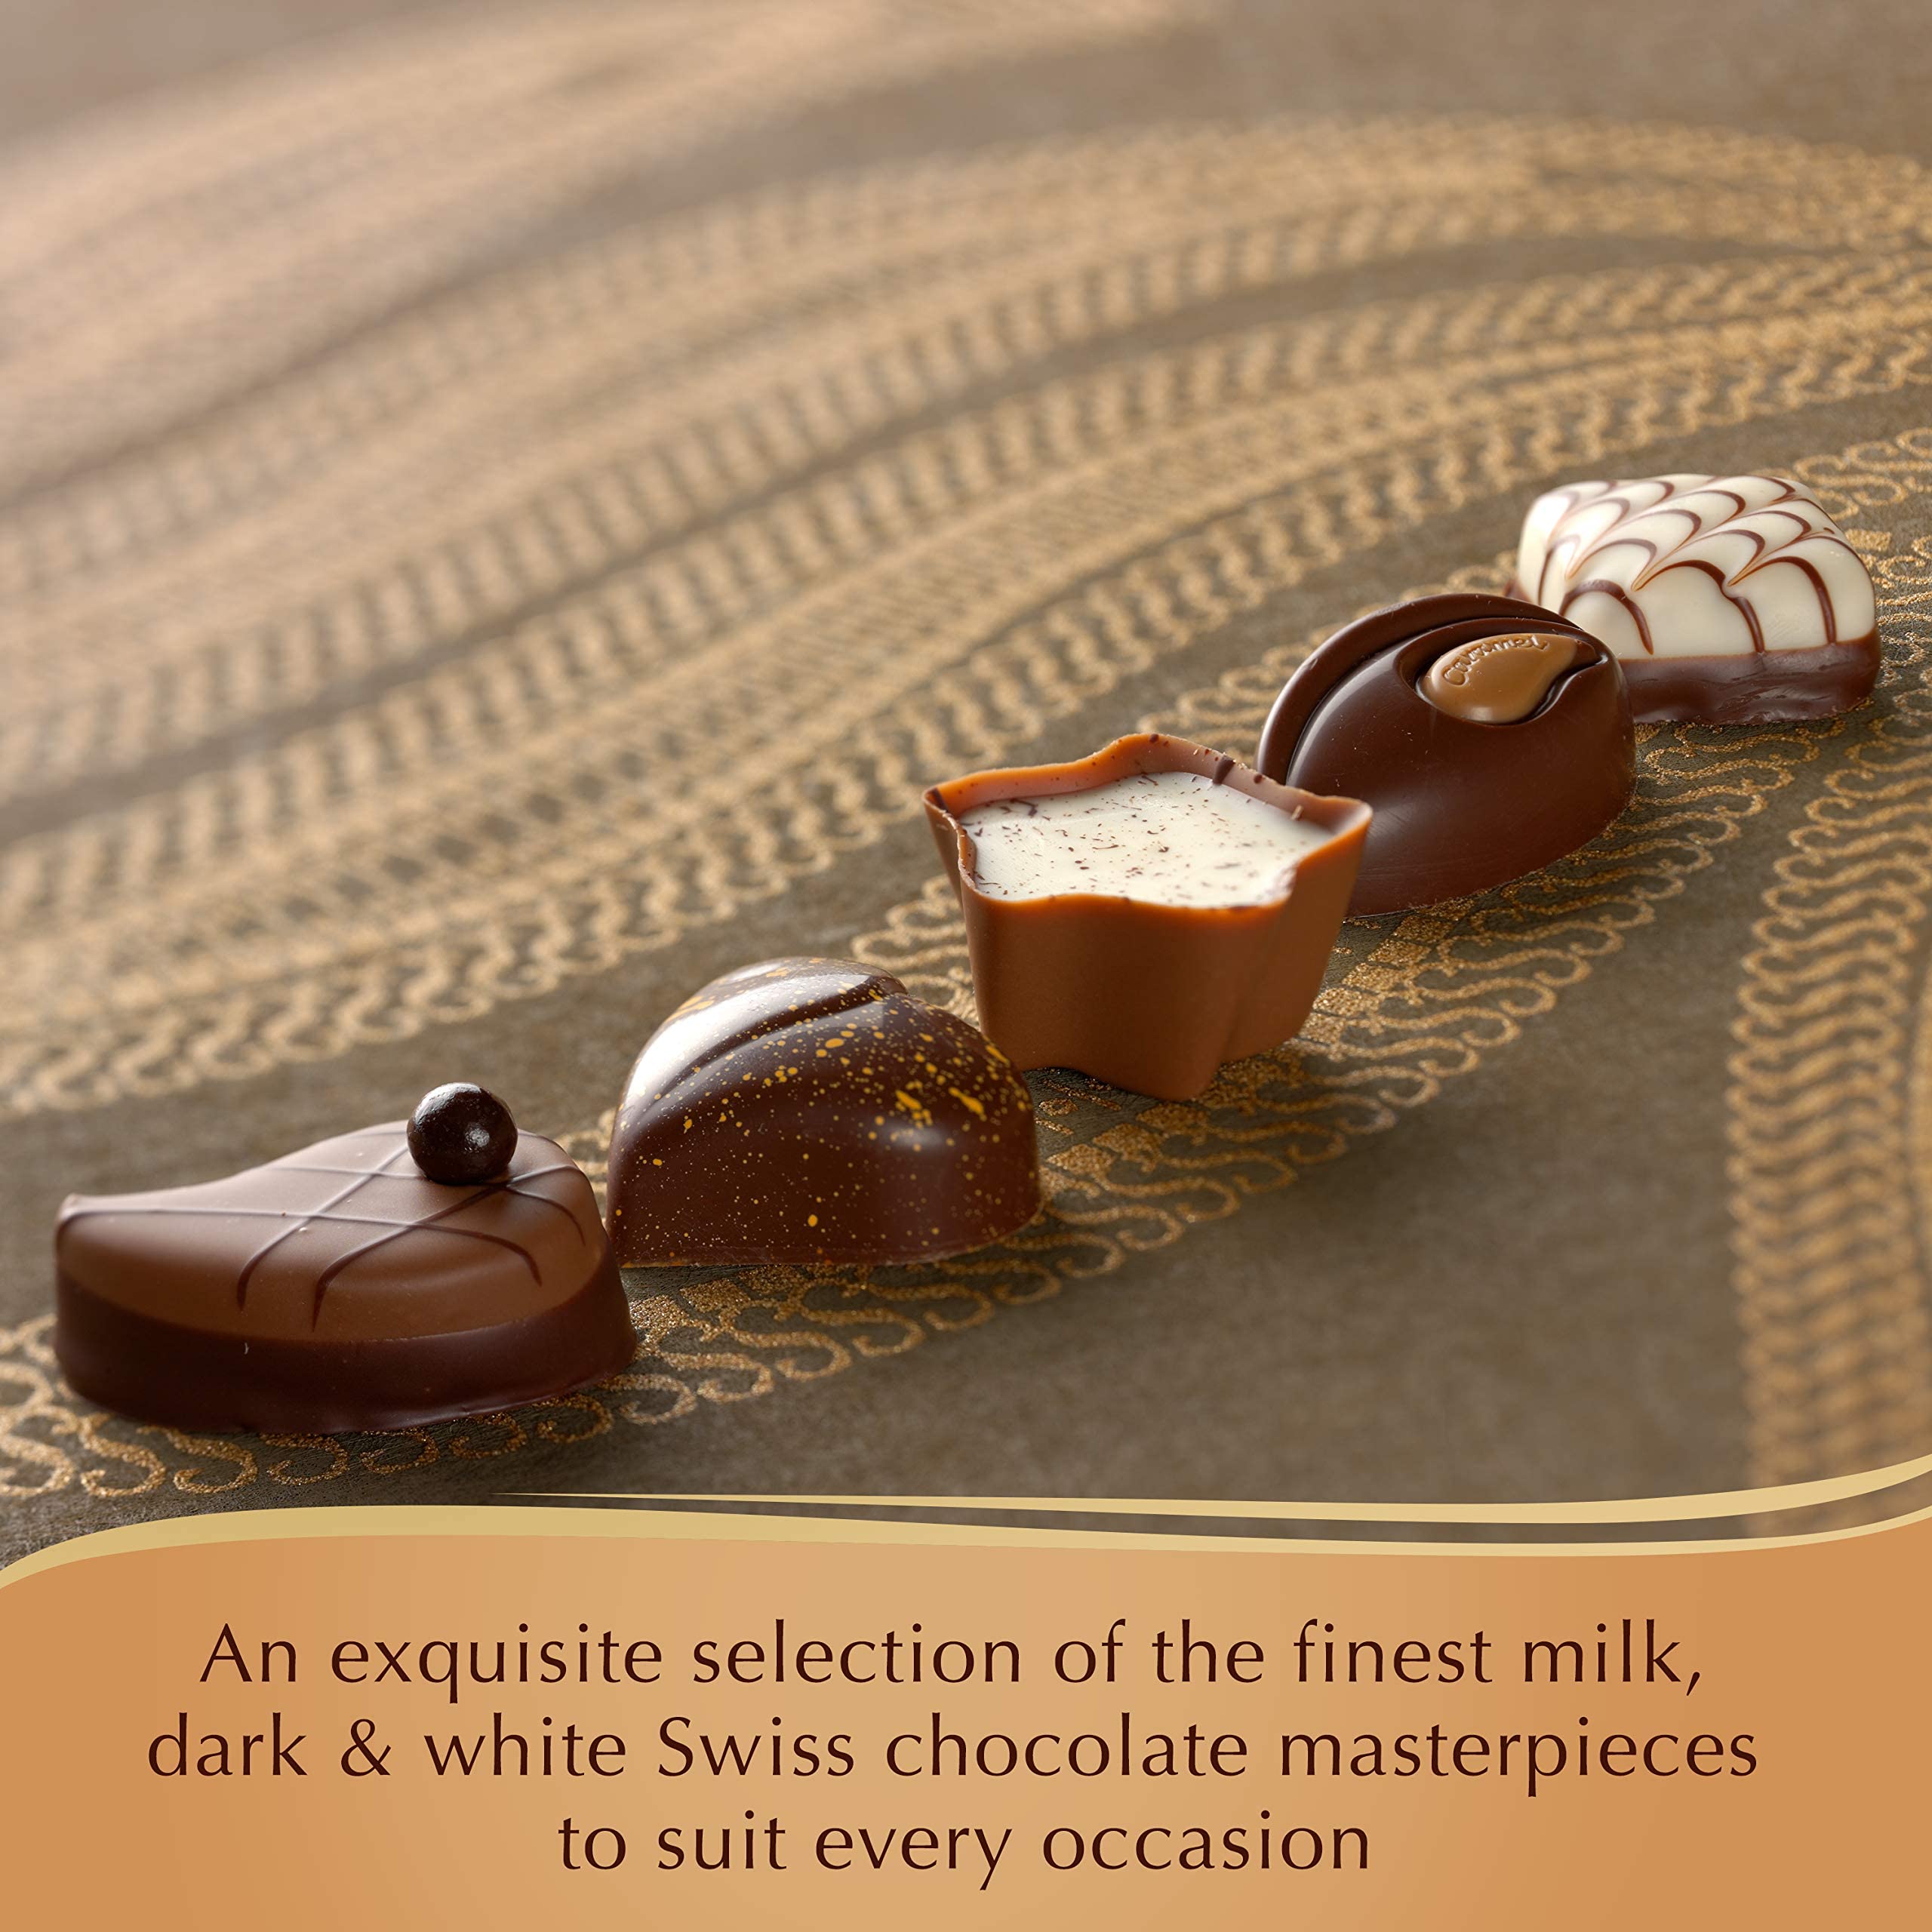 Lindt Swiss Luxury Finest Selection of Dark, Milk and White Chocolate Pralines (195g)